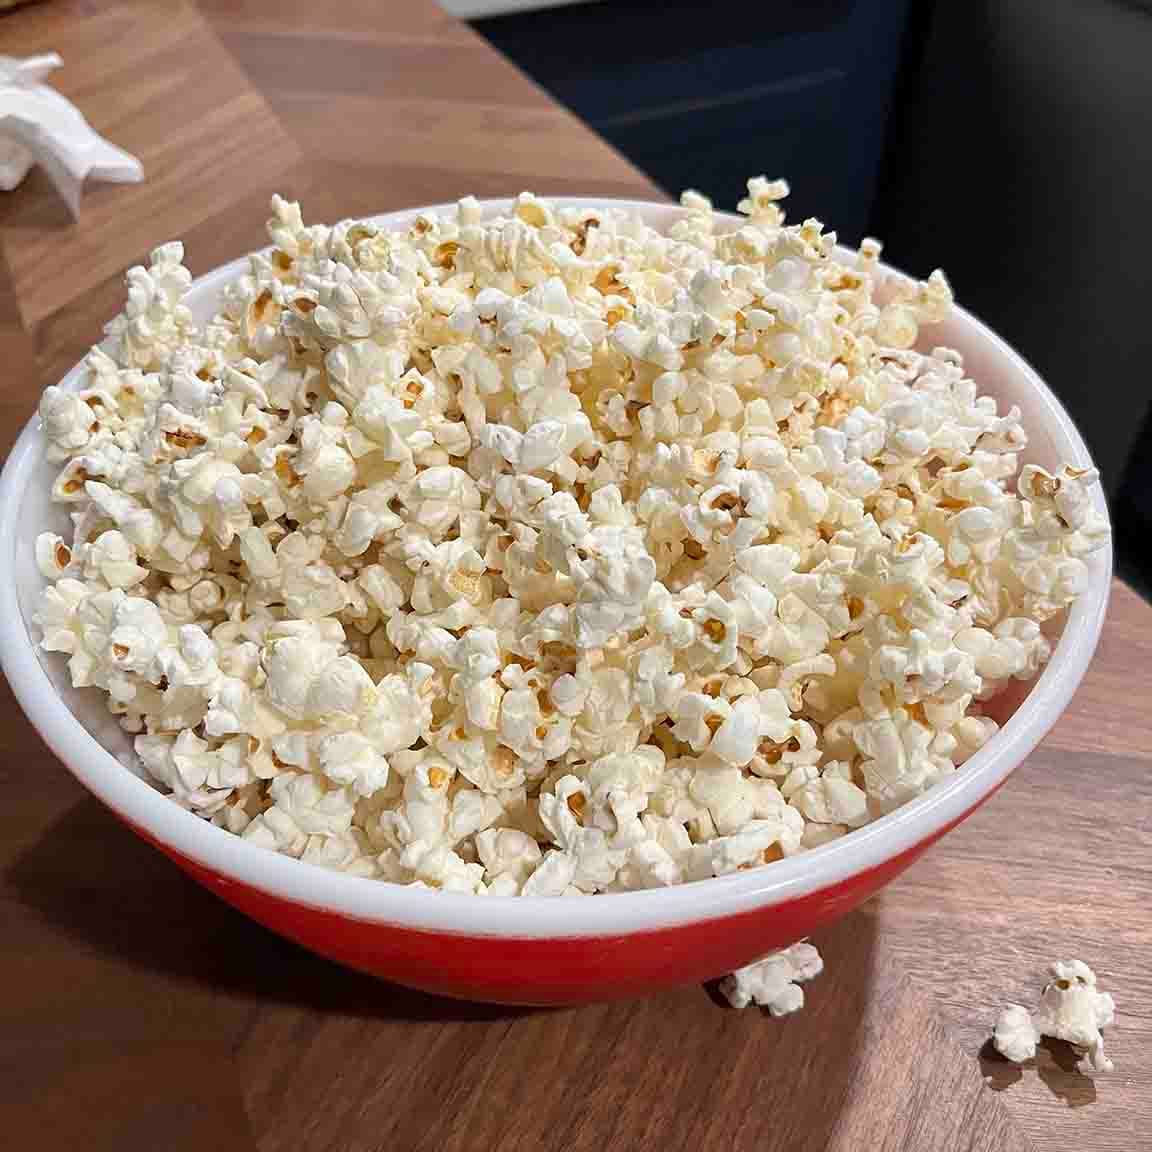 A big bowl of popcorn that I made with my Whirley-Pop